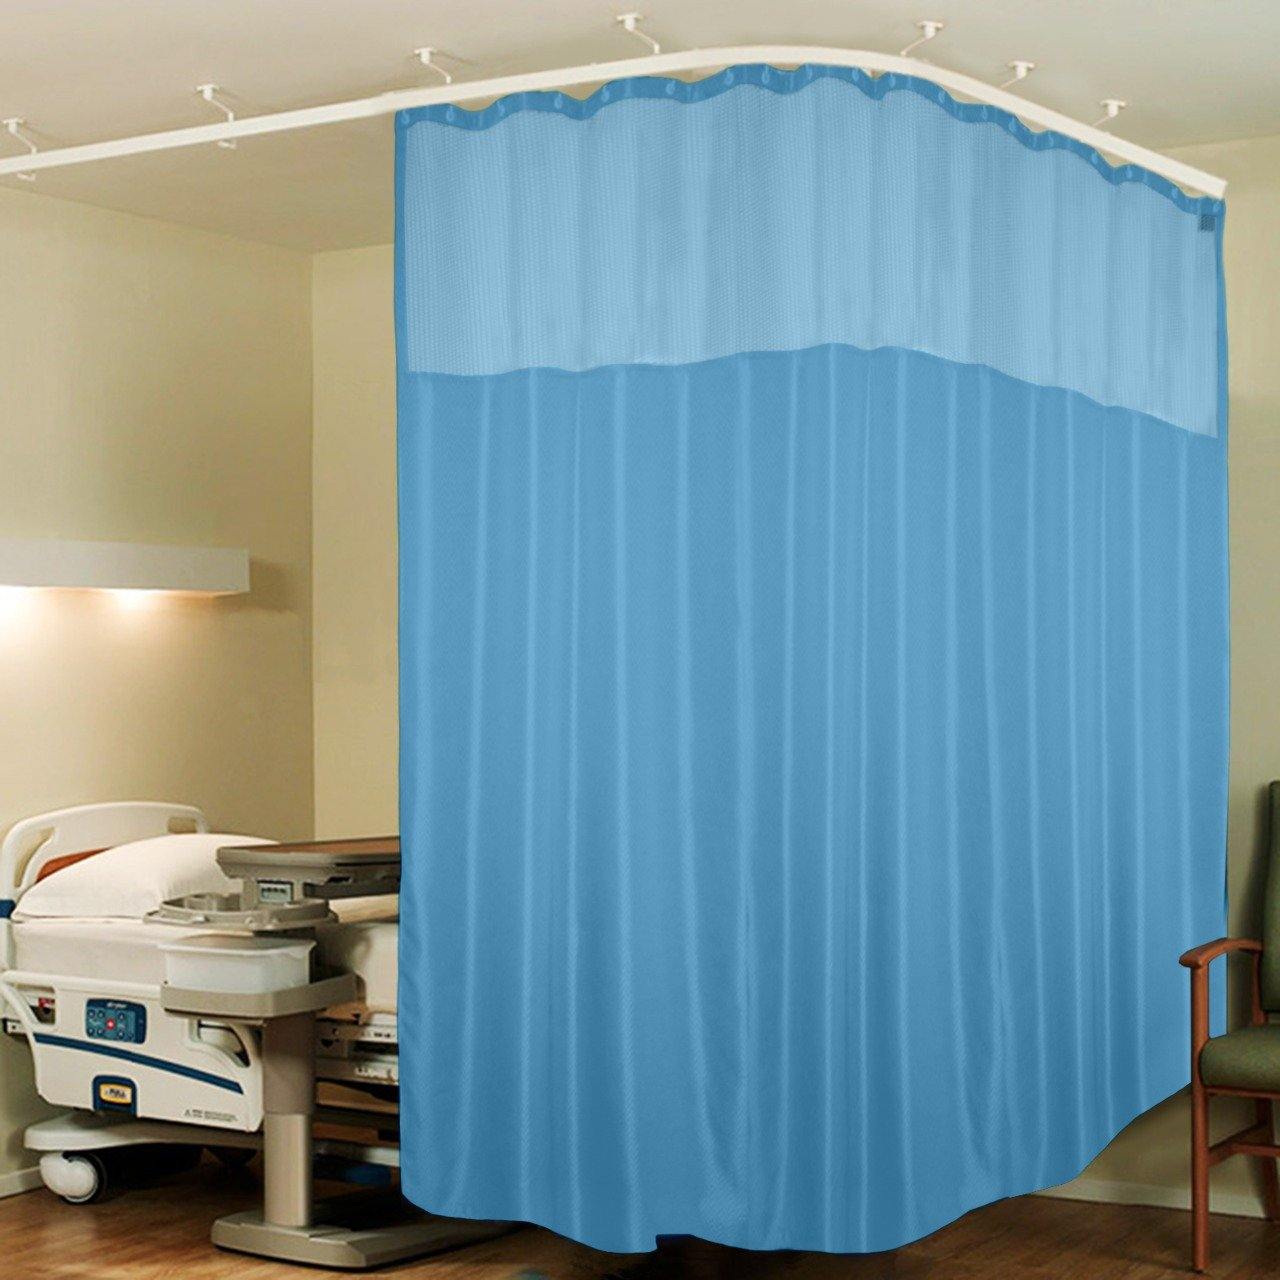 Lushomes Sky Blue Full Sized Hospital ICU Bed Zig Zag Curtain with 16 Eyelets and 16 C-Hooks and Net (8Ft x 7Ft, 2 Panels Attached) - Lushomes